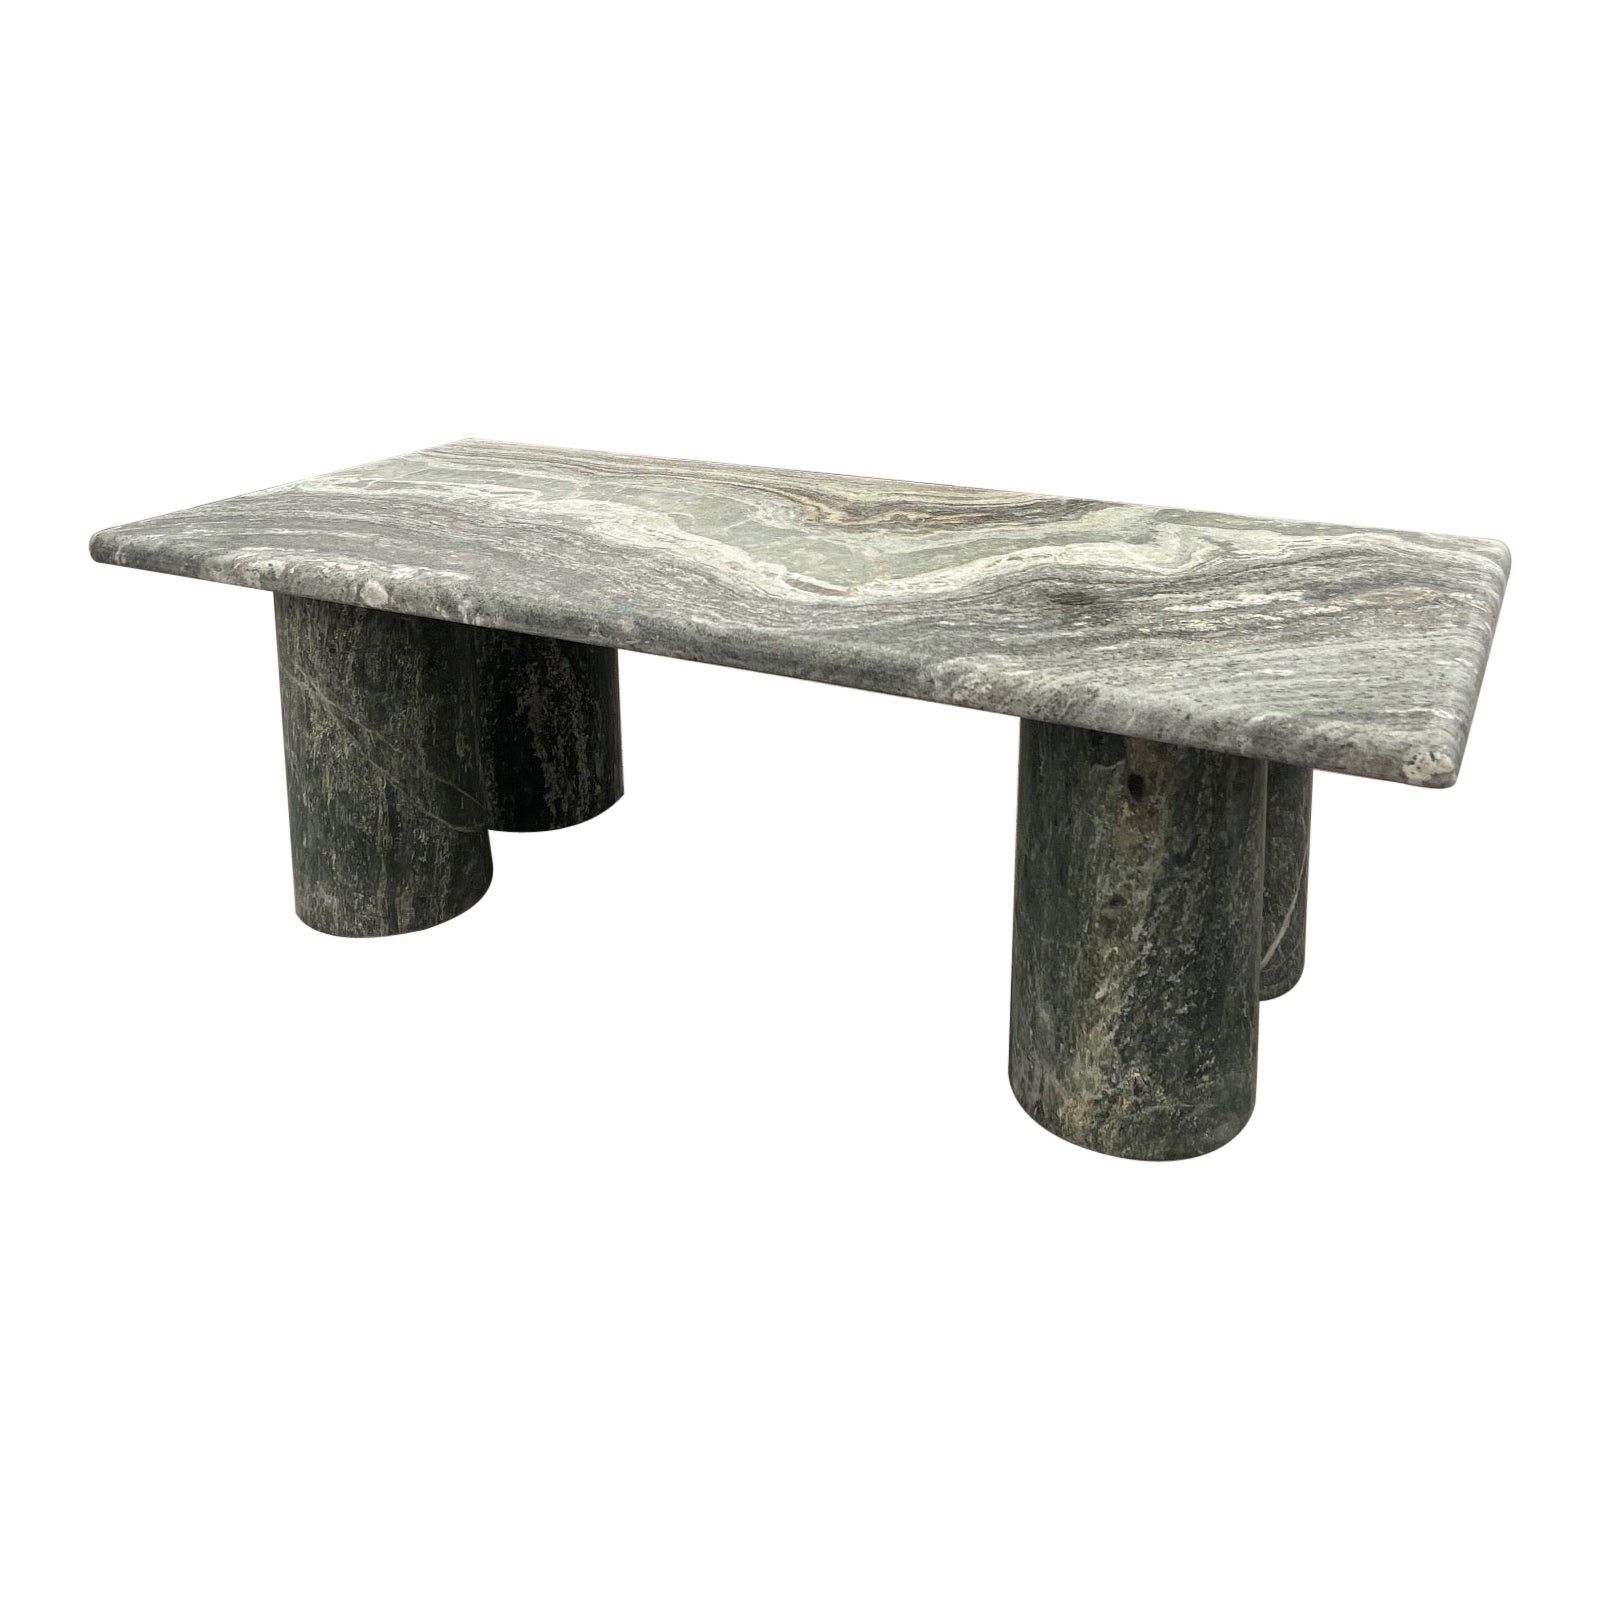 Solid Stone Green Marble Rectangle Coffee Table with Cylinder Column Legs